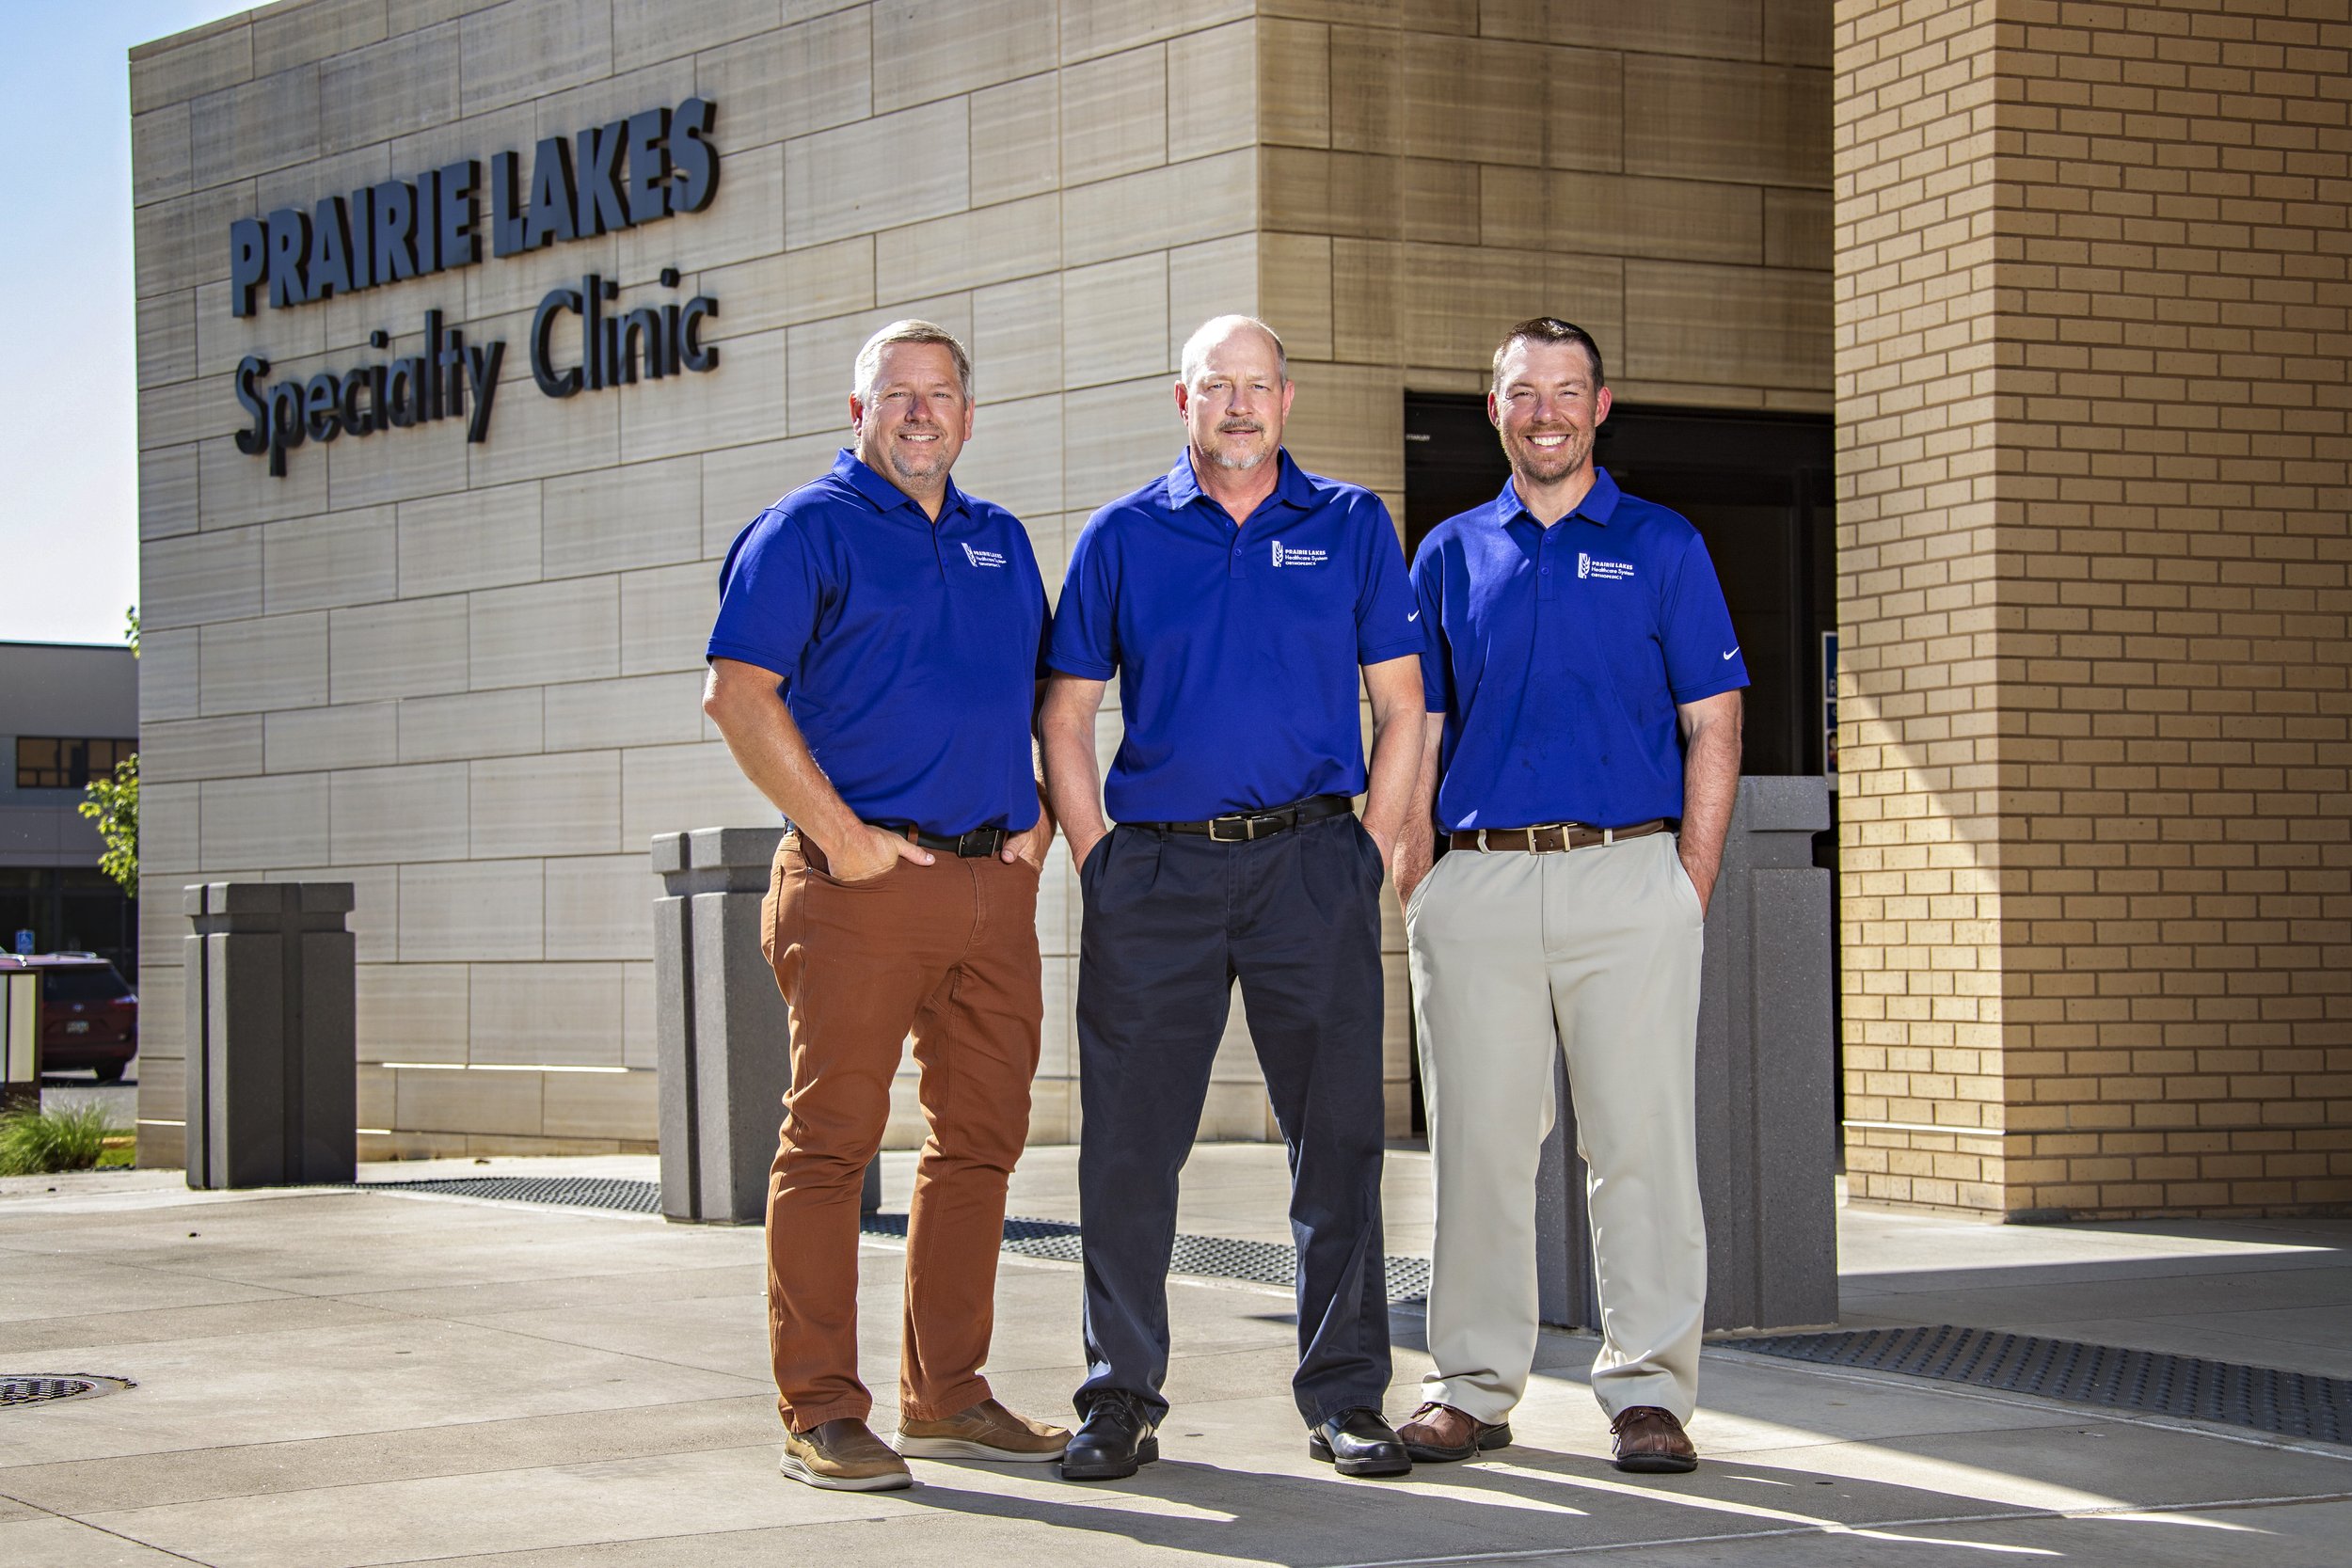 Glacial Lakes Orthopedics in Watertown becomes a part of Prairie Lakes Orthopedics, expanding orthopedic care in the region